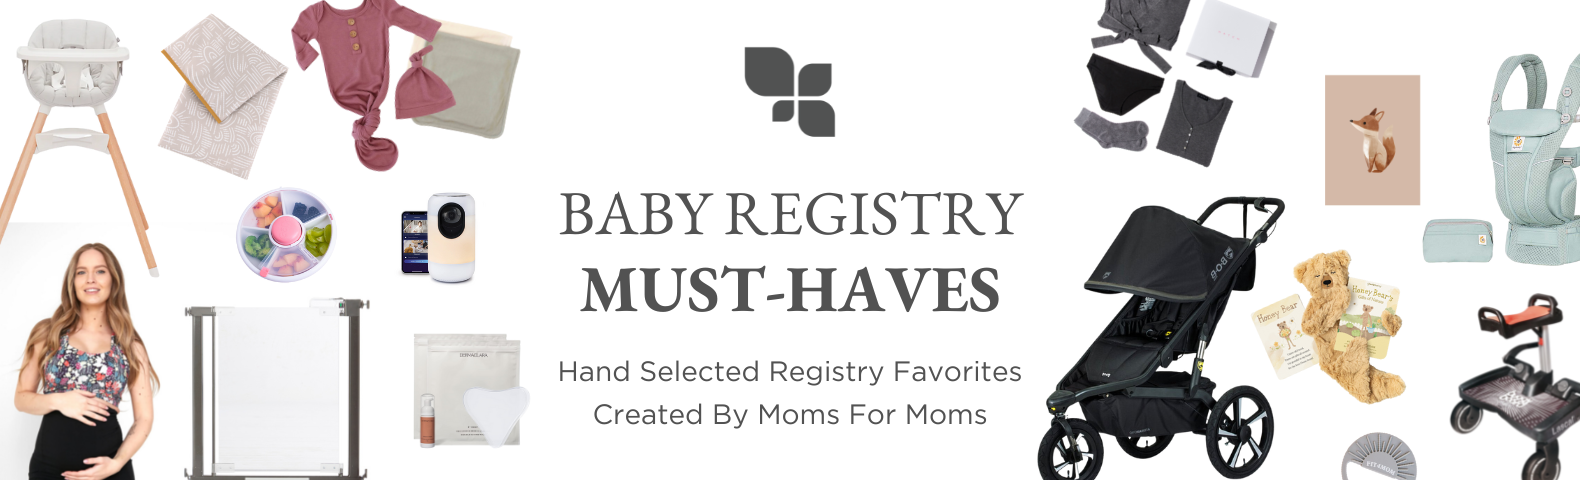 Baby Registry Campaign - Landing Page Headers (2).png